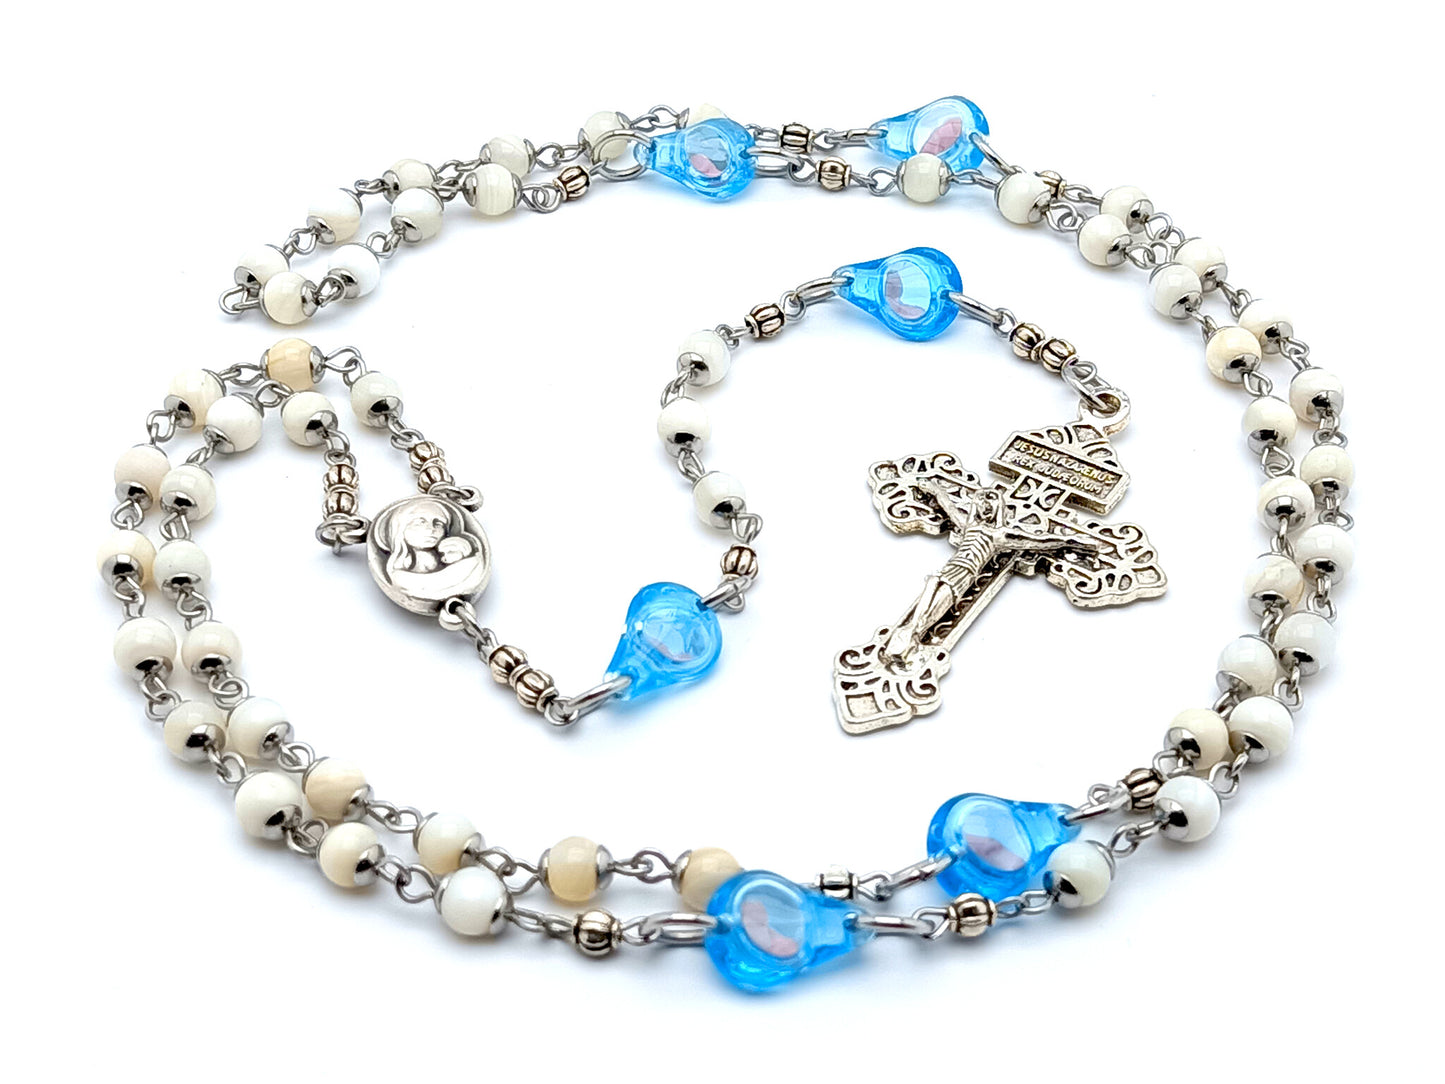 Pro Life unique rosary beads with unborn fetus teardrops and pearl beads, silver crucifix and Virgin and Child medal.